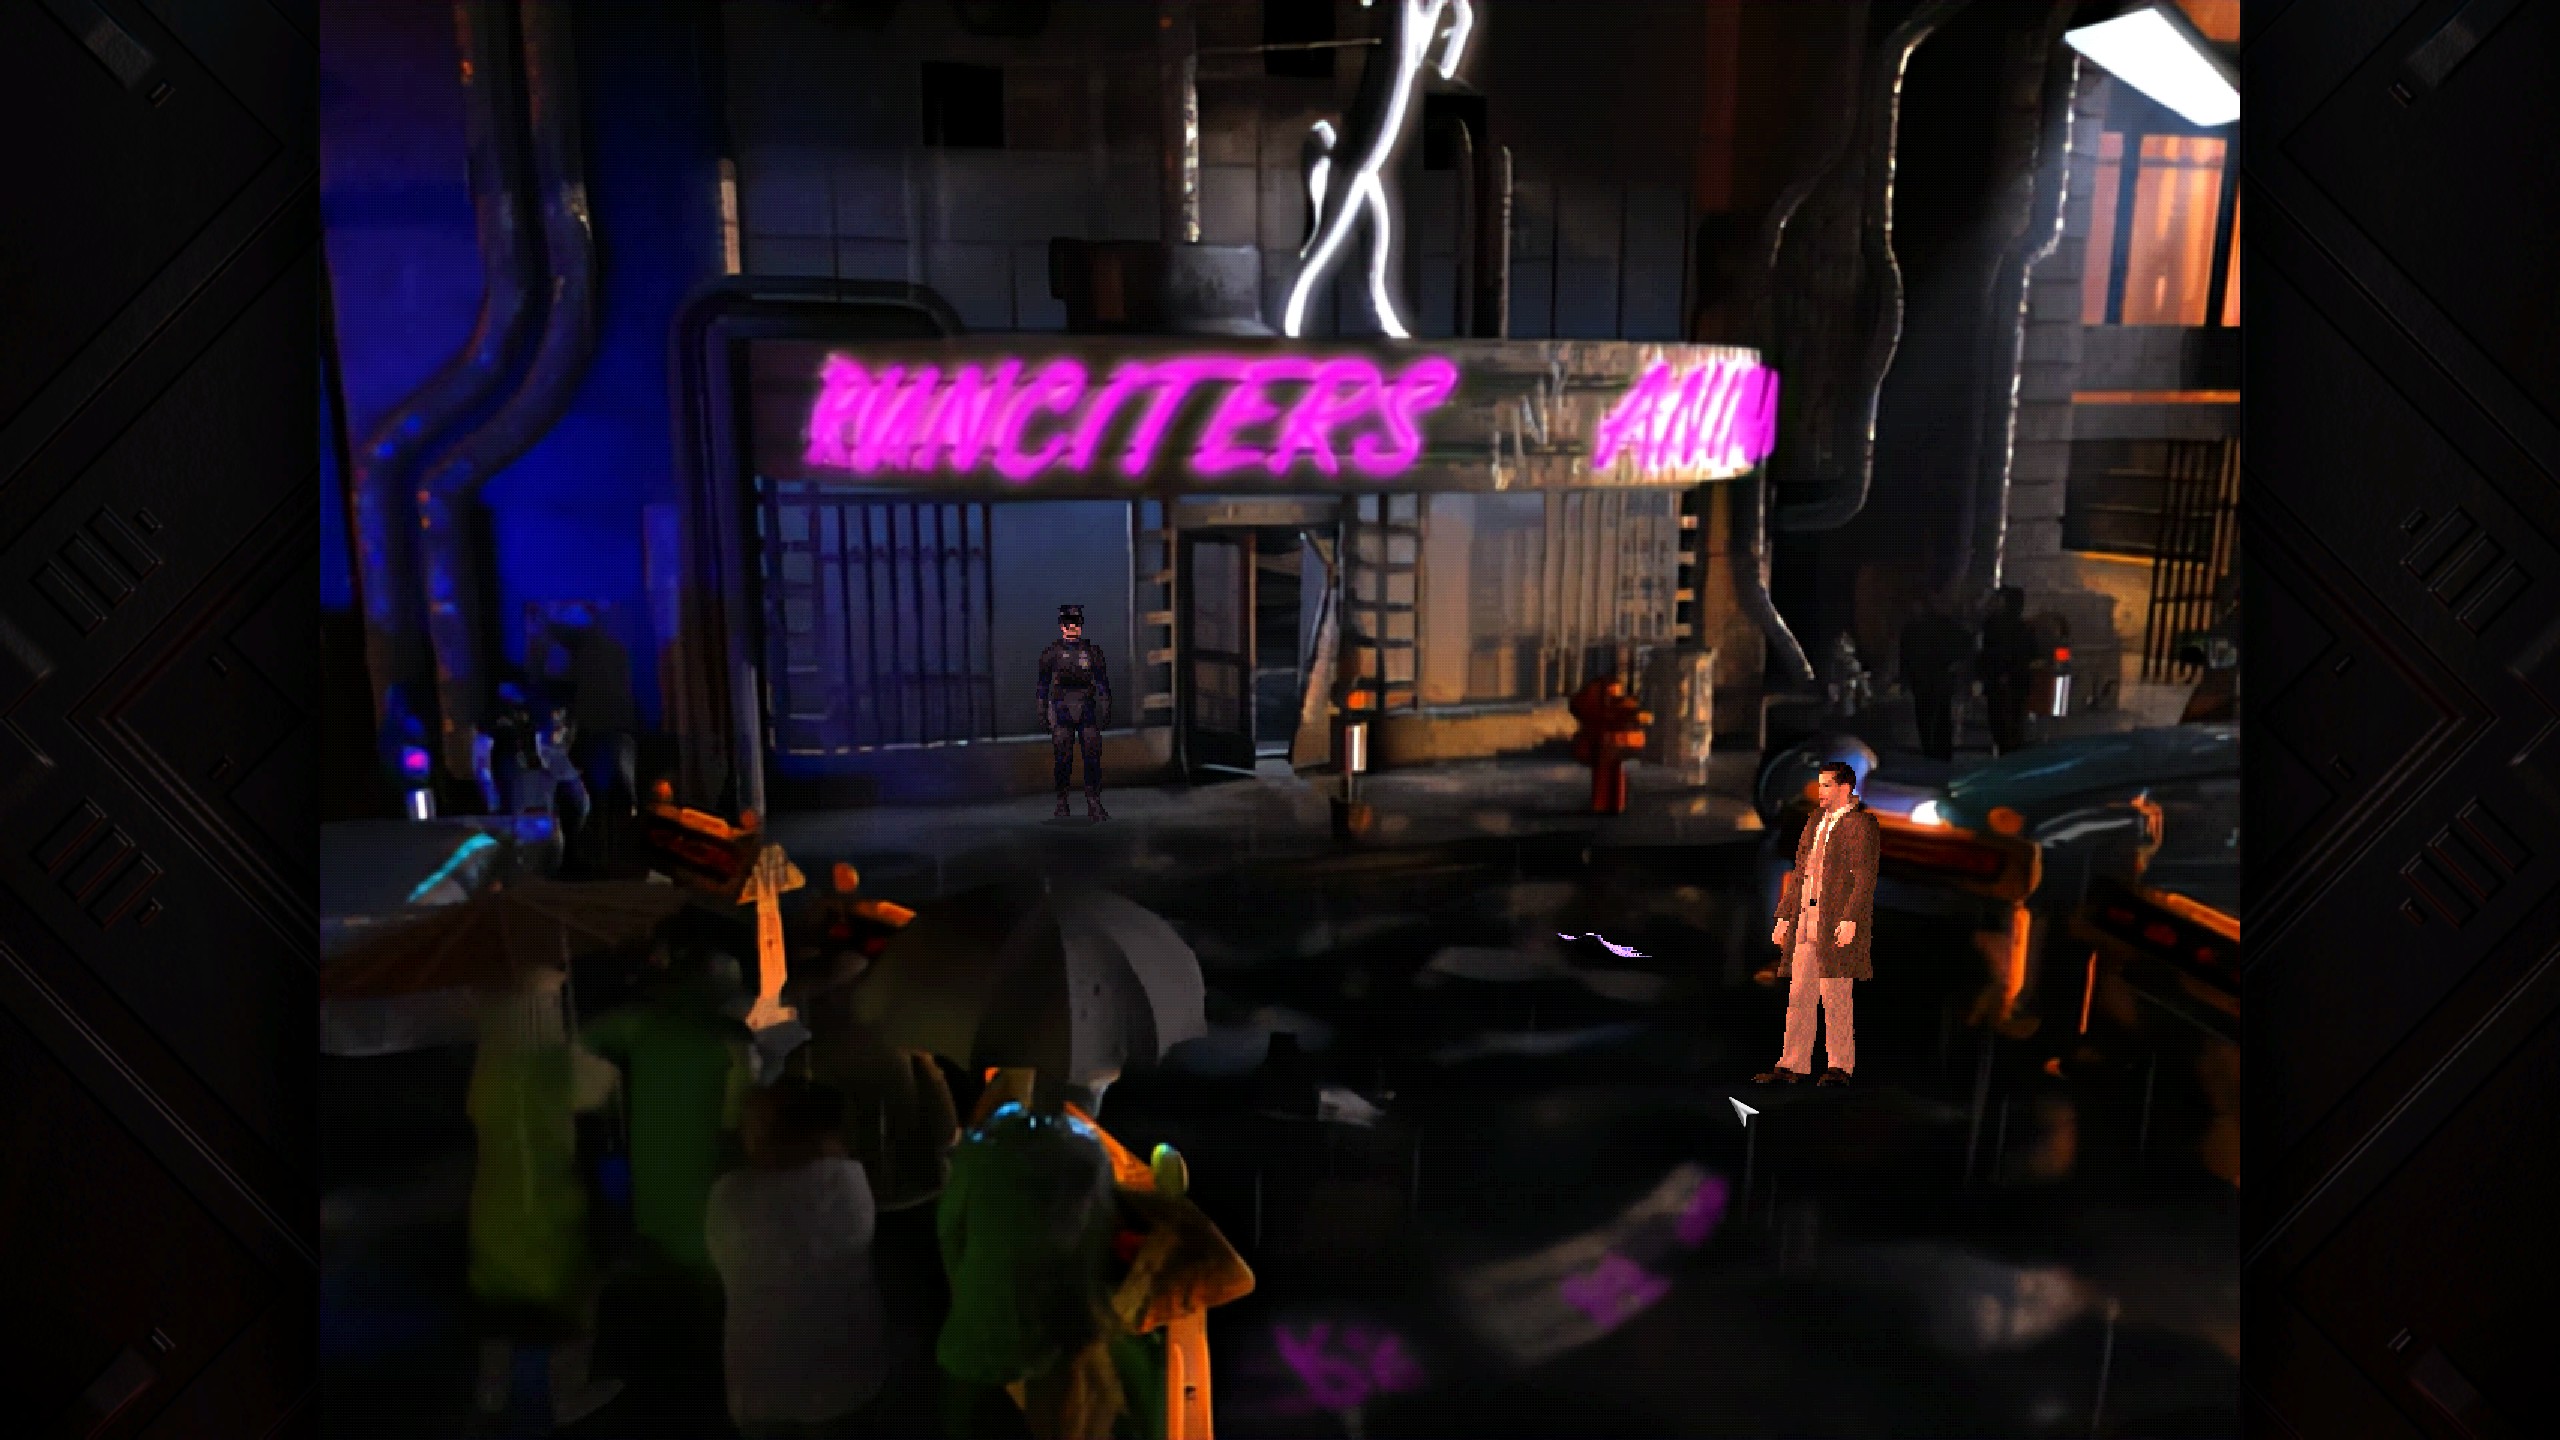 The first crime scene in the enhanced version